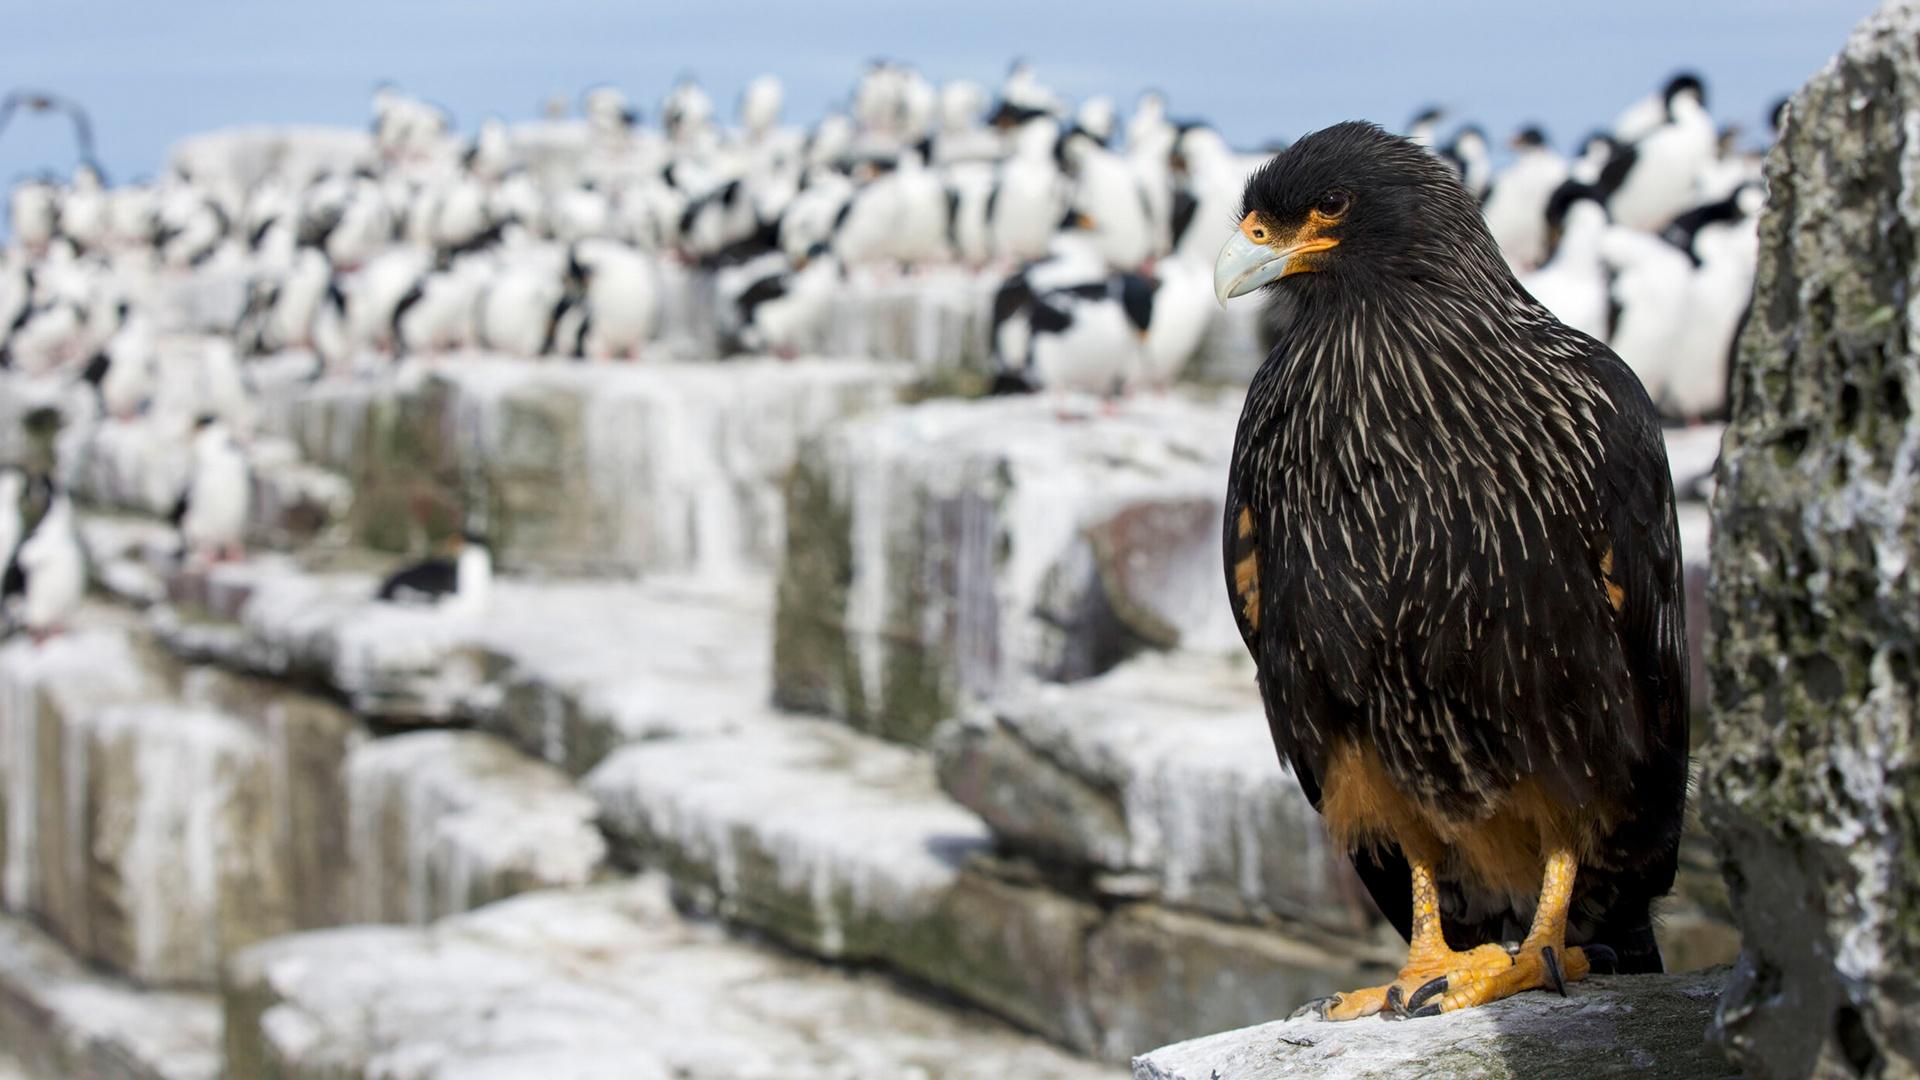 A raptor perches on rocky cliff with penguins in the background